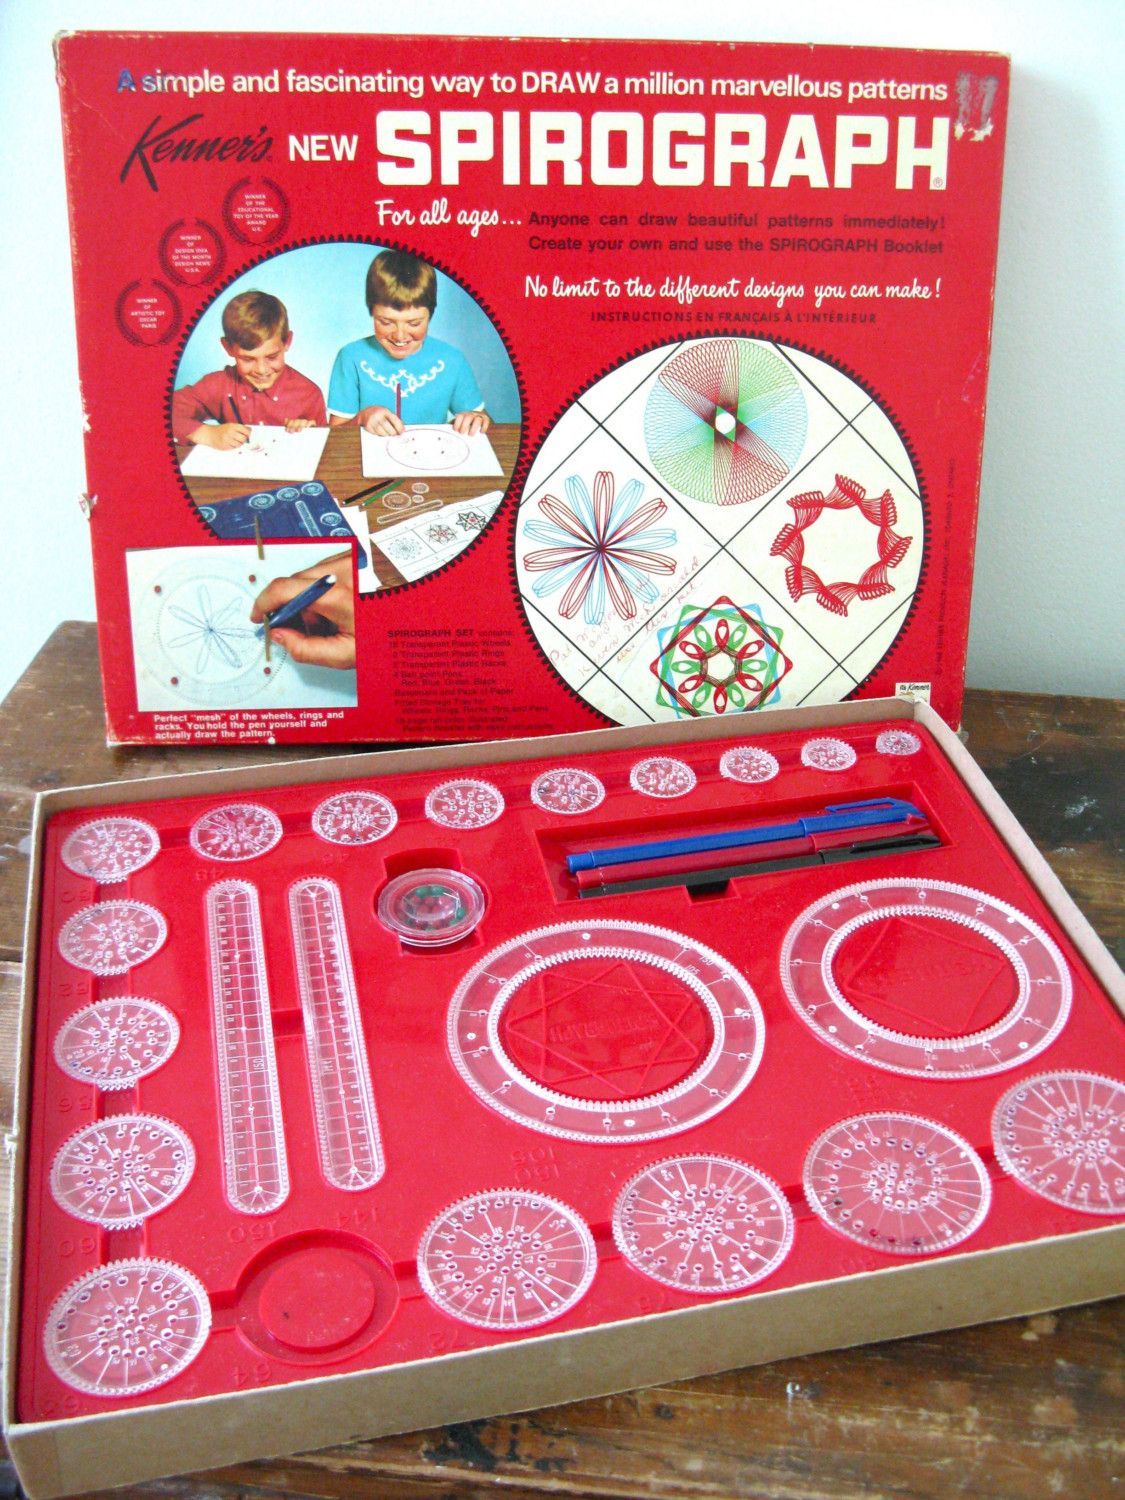 I actually have my original Spirograph and all the pieces!!